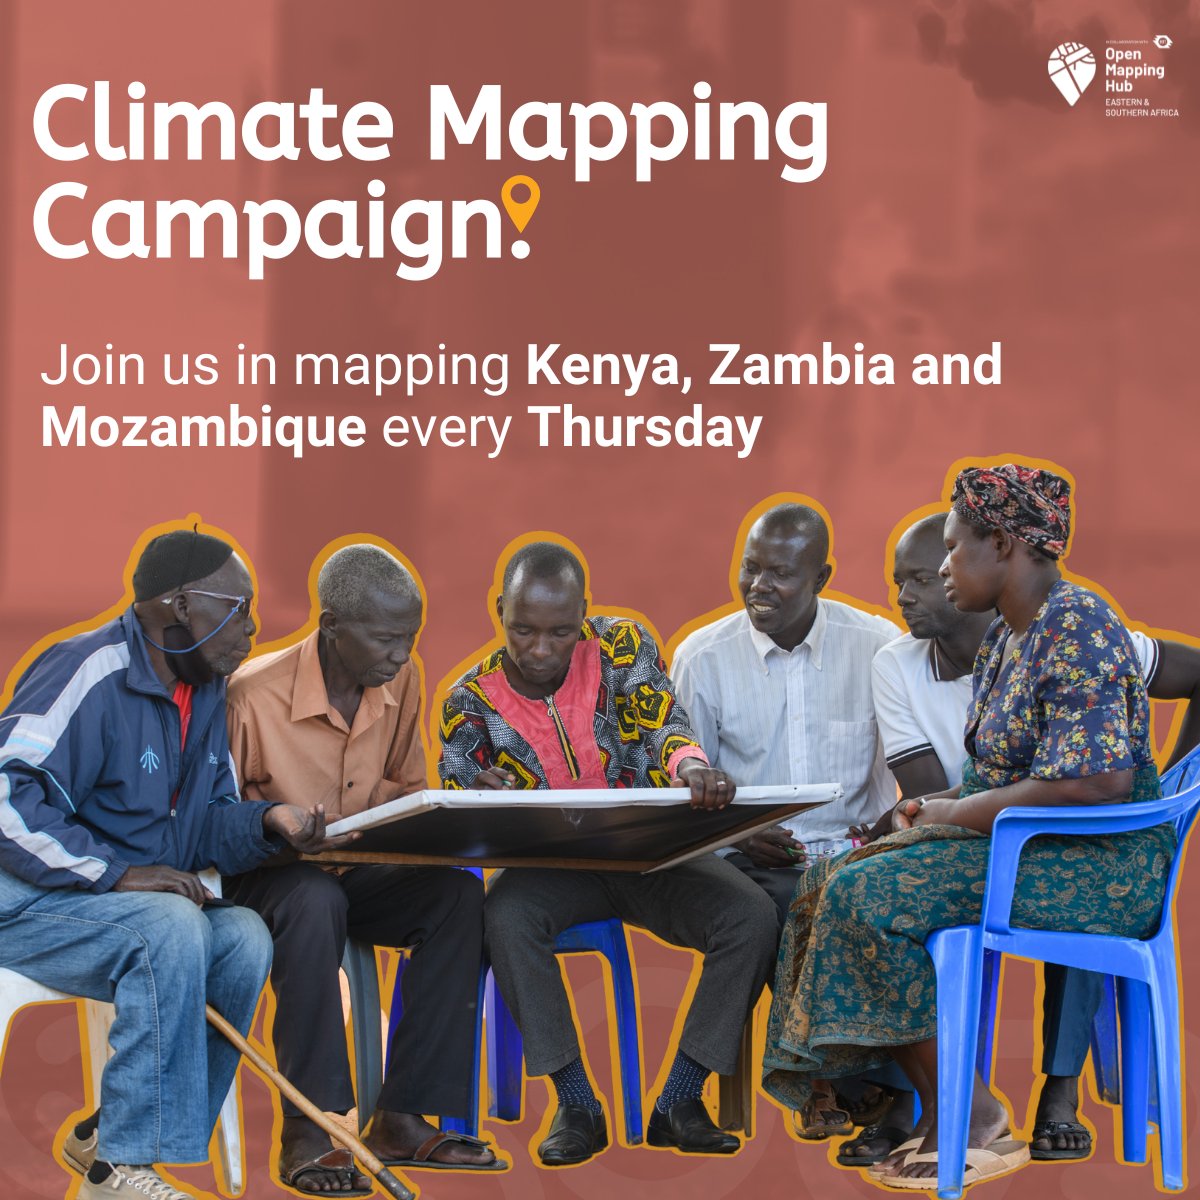 Join our Climate Mapping Campaign Mapathon every Thursday at 1500 CAT. We are currently mapping Kenya for flood response. See you on Thursday! Register here:shorturl.at/luv08 Zoom link: shorturl.at/KMPW3 #ClimateMappingCampaign #ESAHub